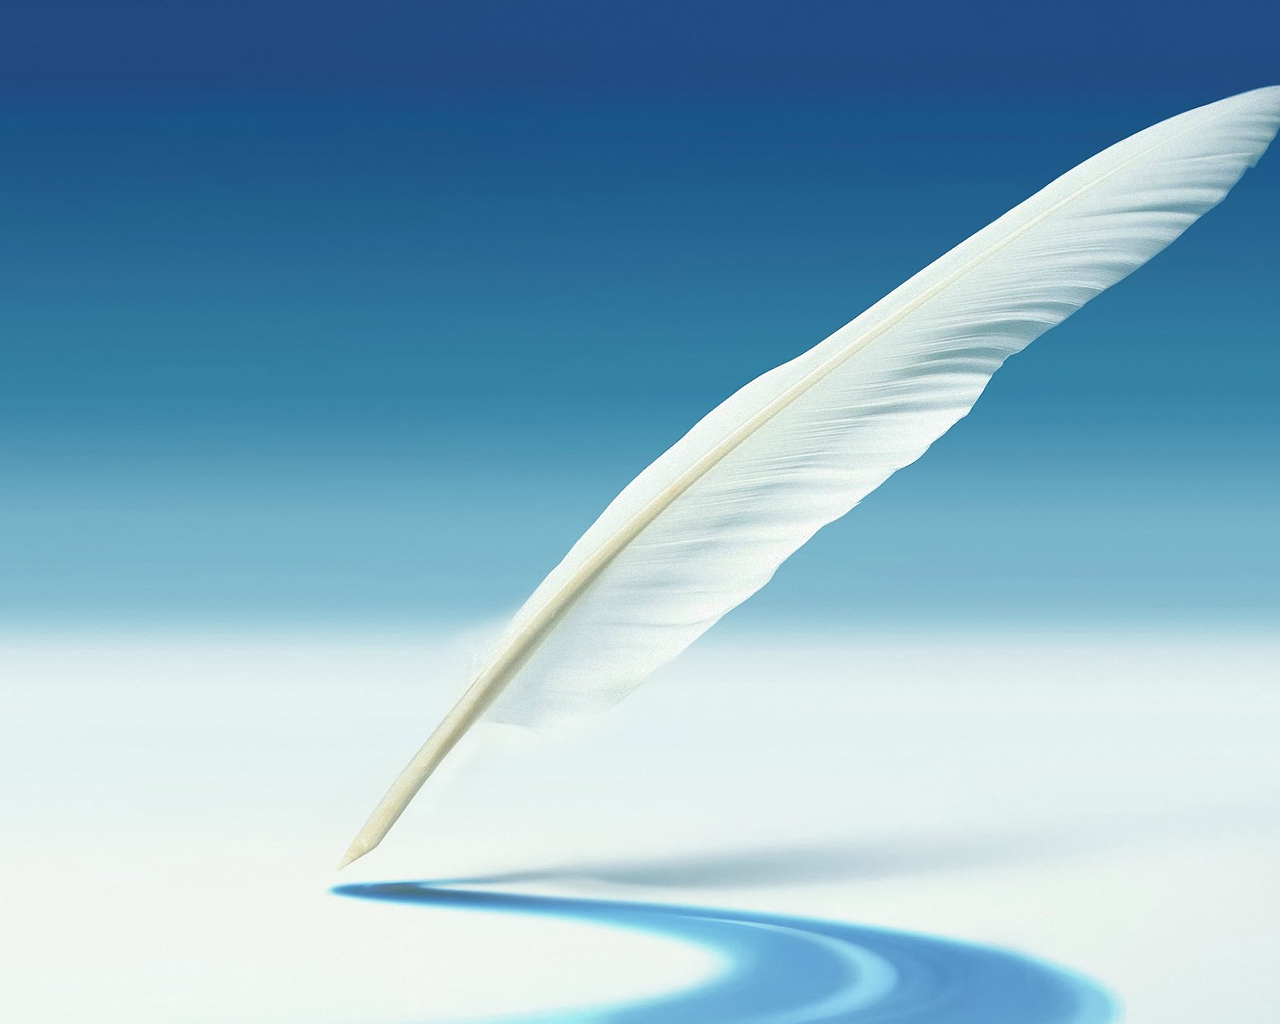 Feather Pen for 1280 x 1024 resolution